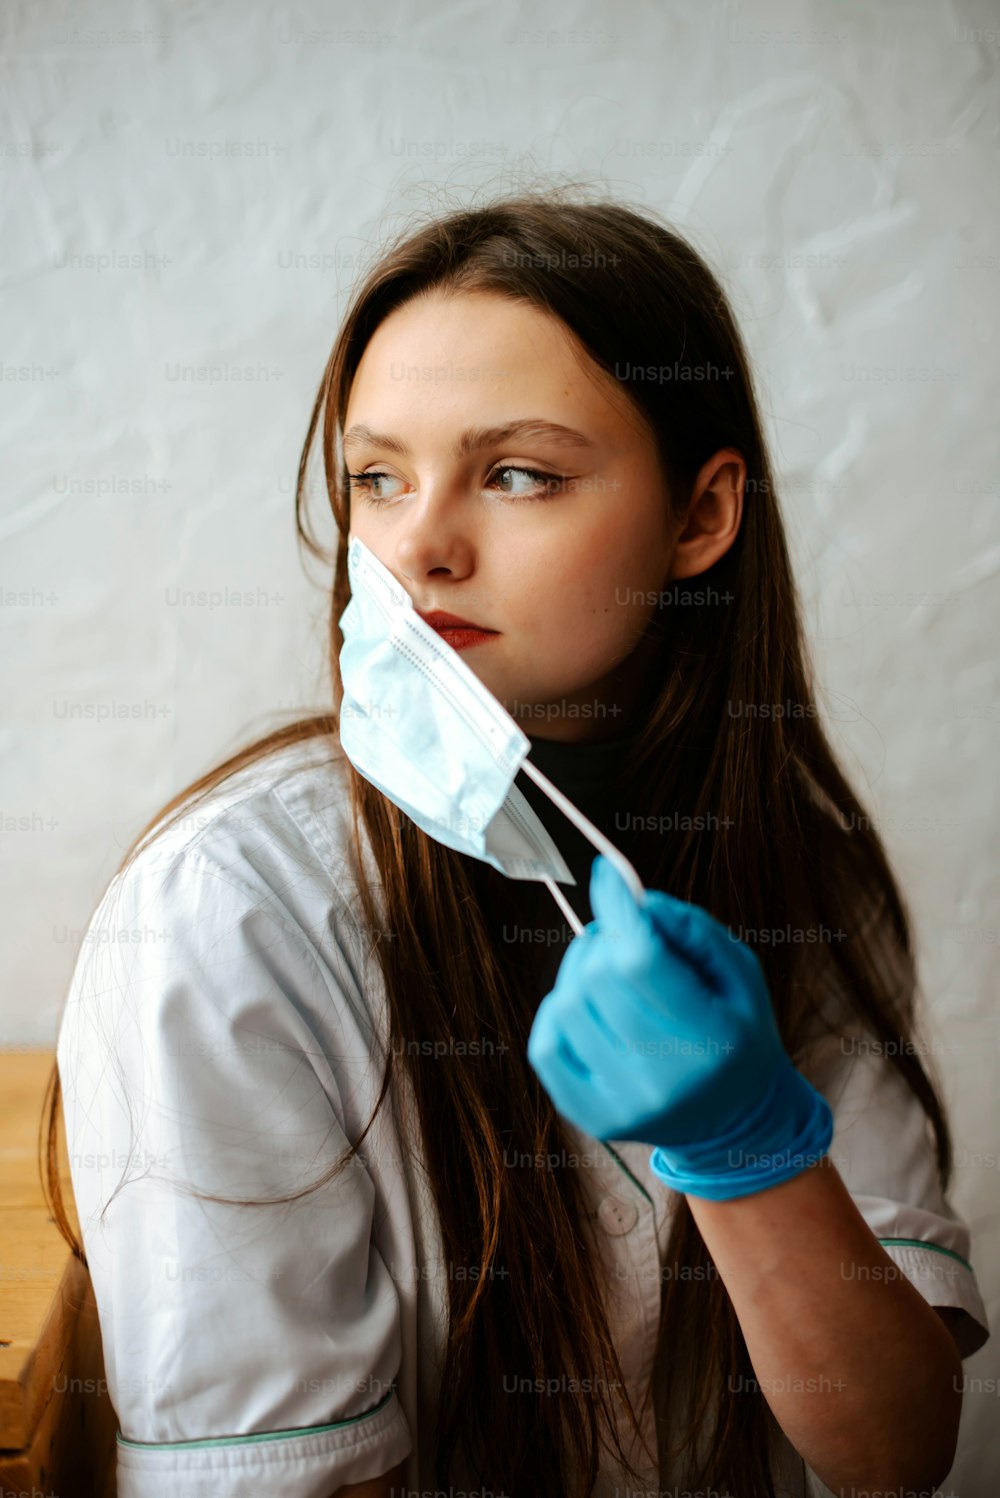 a woman in a white shirt and blue gloves holds a surgical mask over her mouth